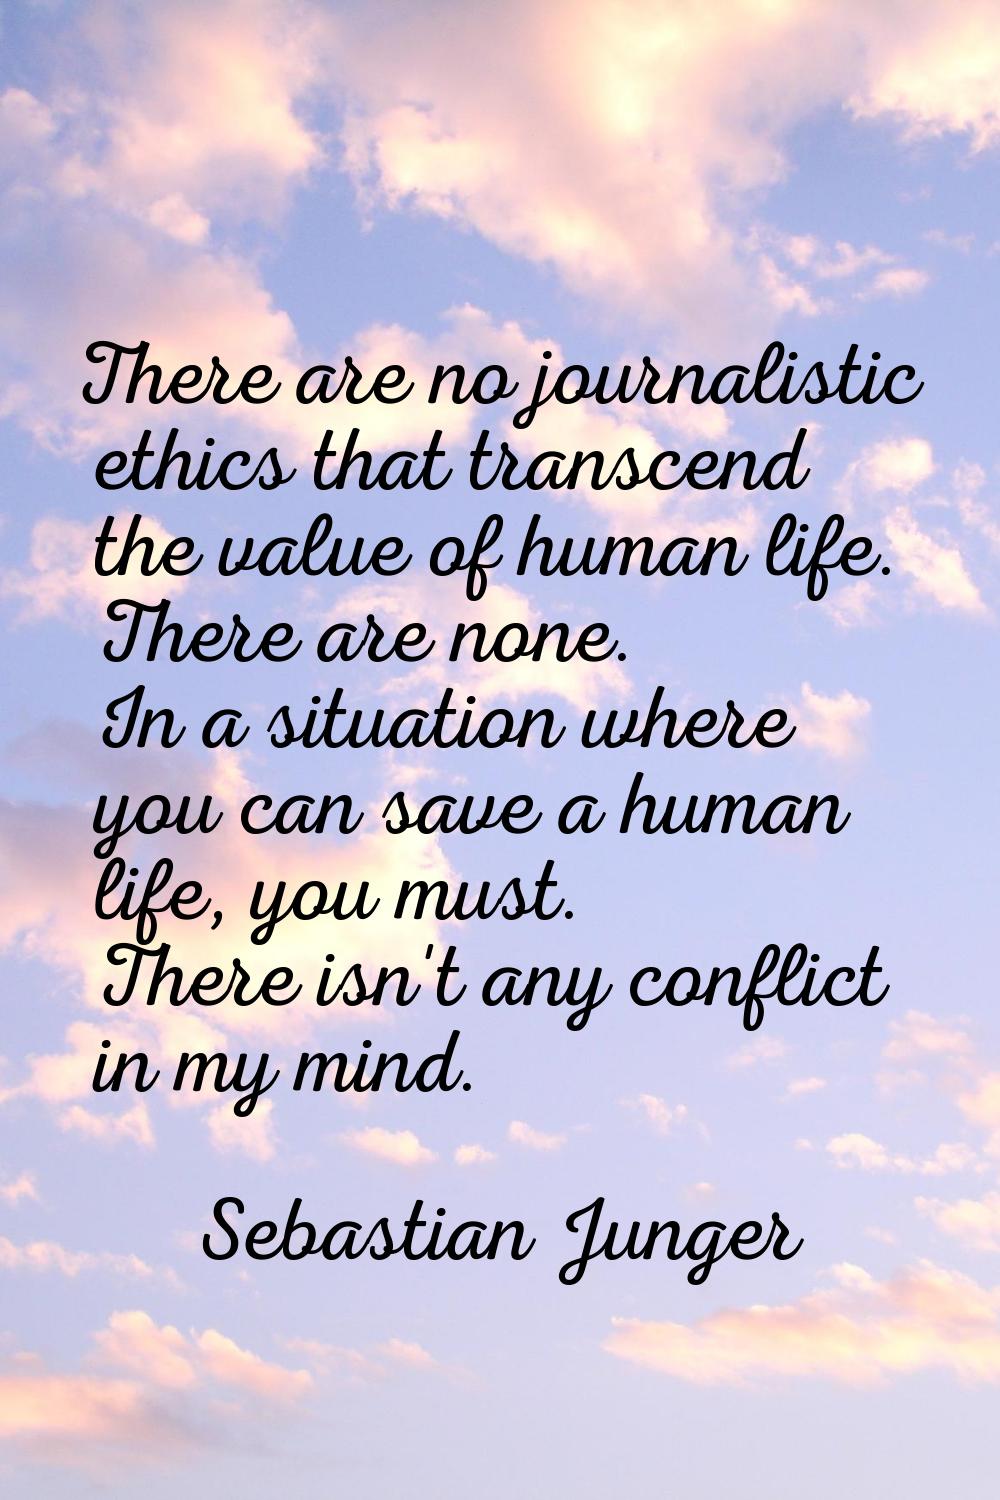 There are no journalistic ethics that transcend the value of human life. There are none. In a situa